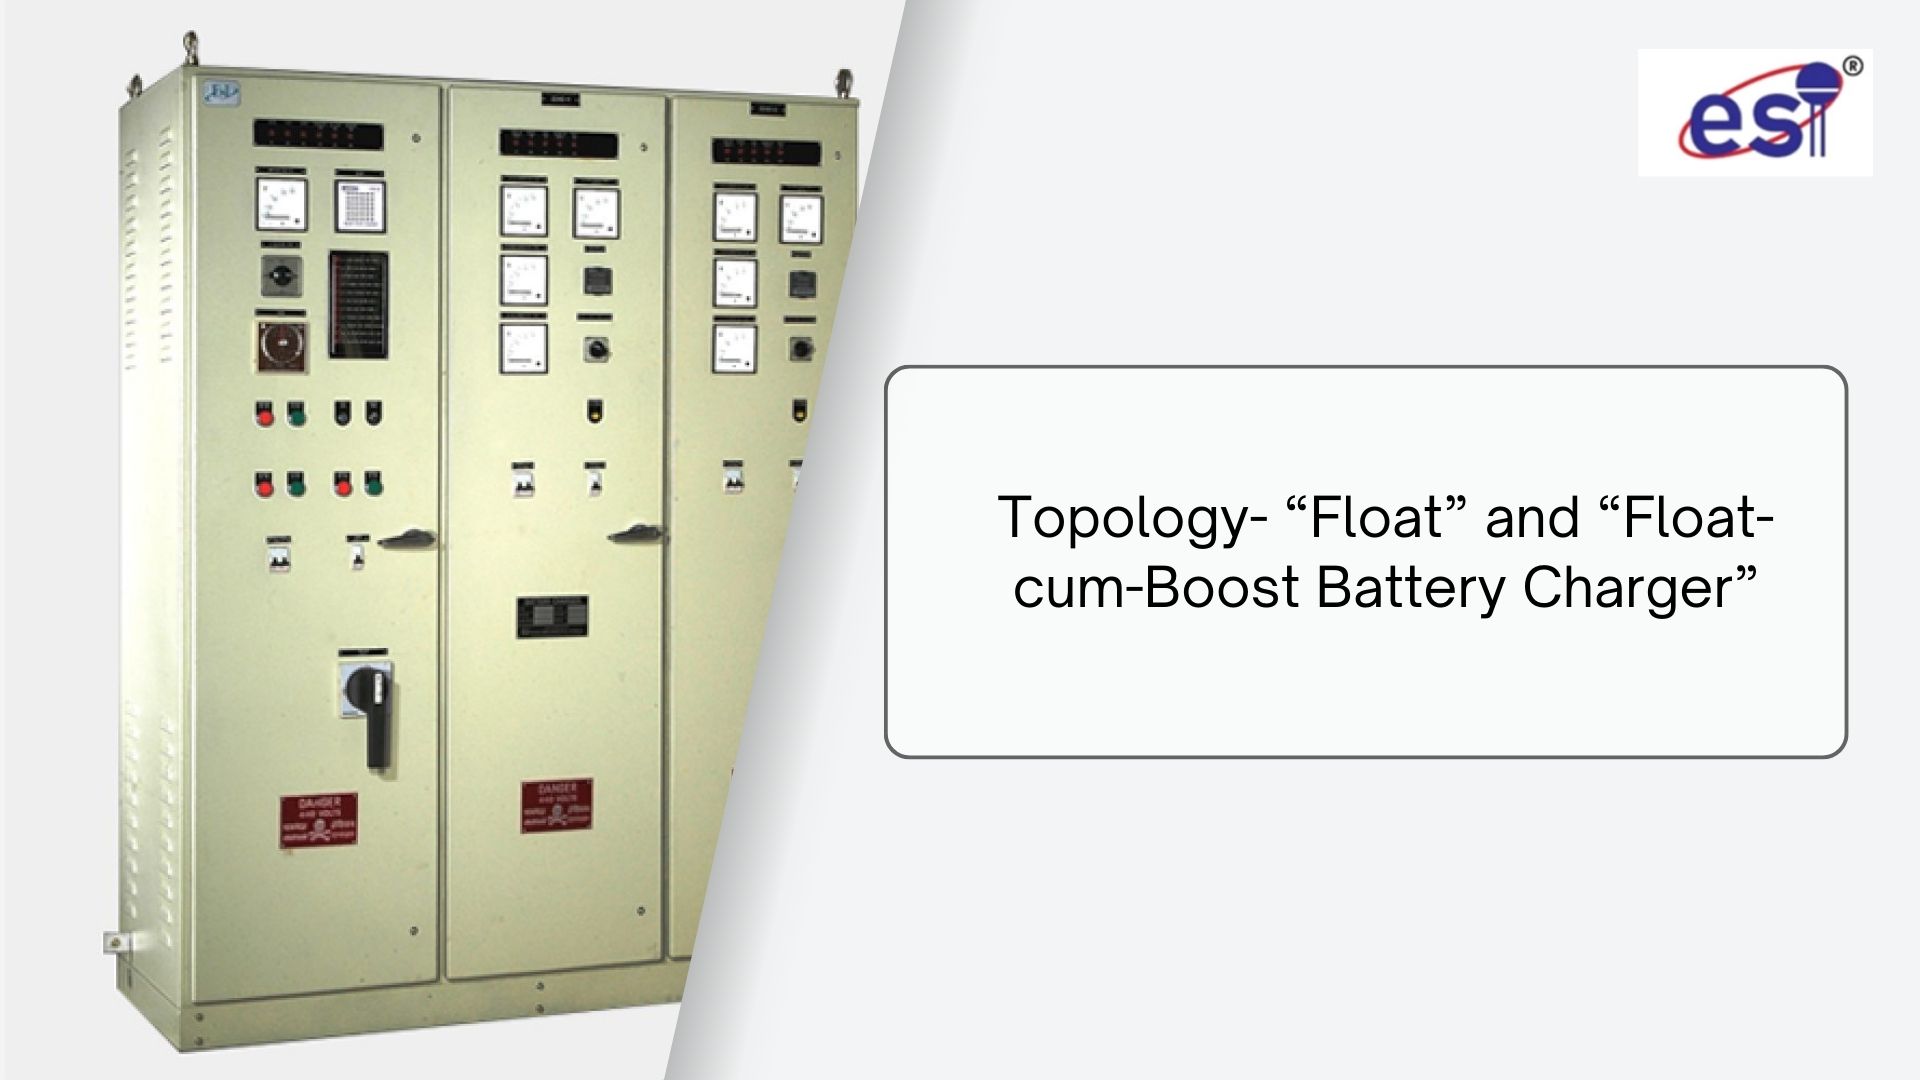 Topology- “Float” and “Float-cum-Boost Battery Charger”